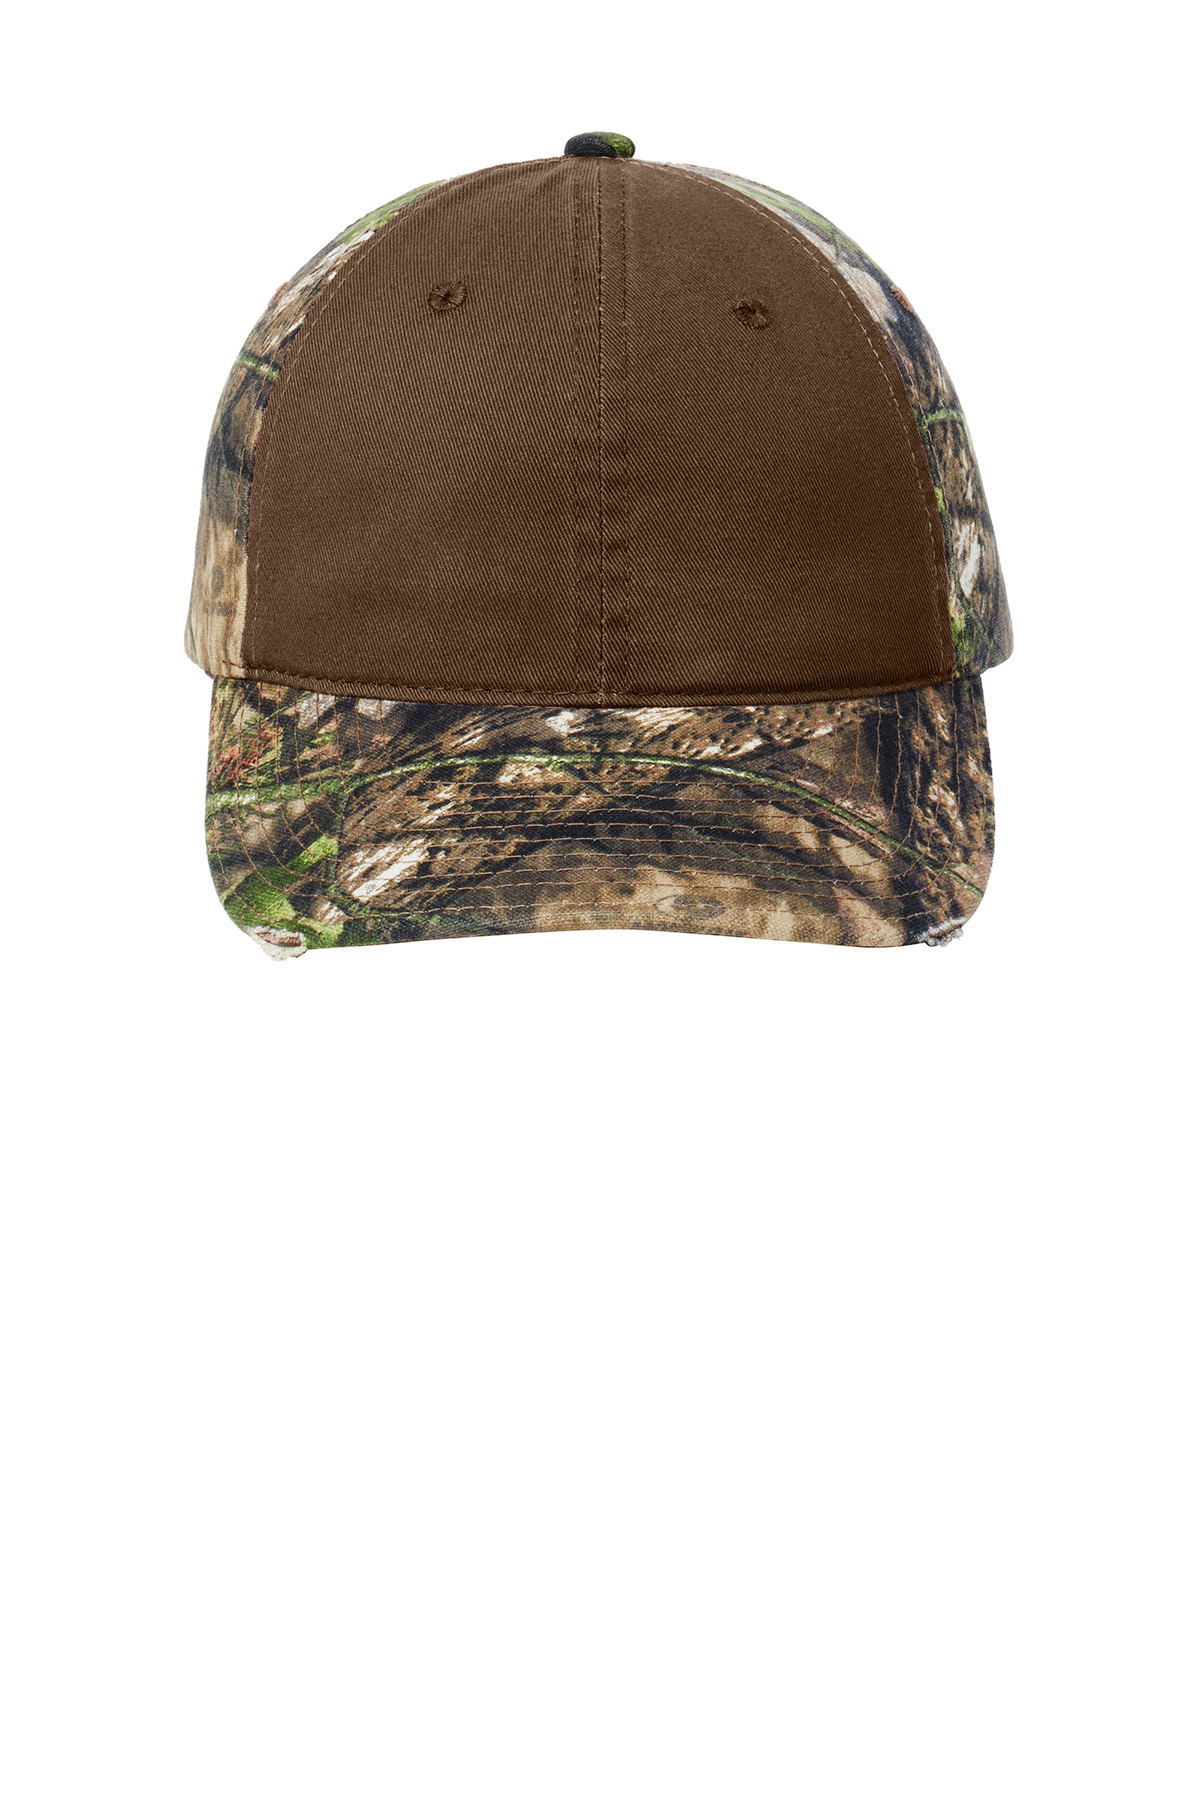 Port Authority Camo Cap with Contrast Front Panel, Product